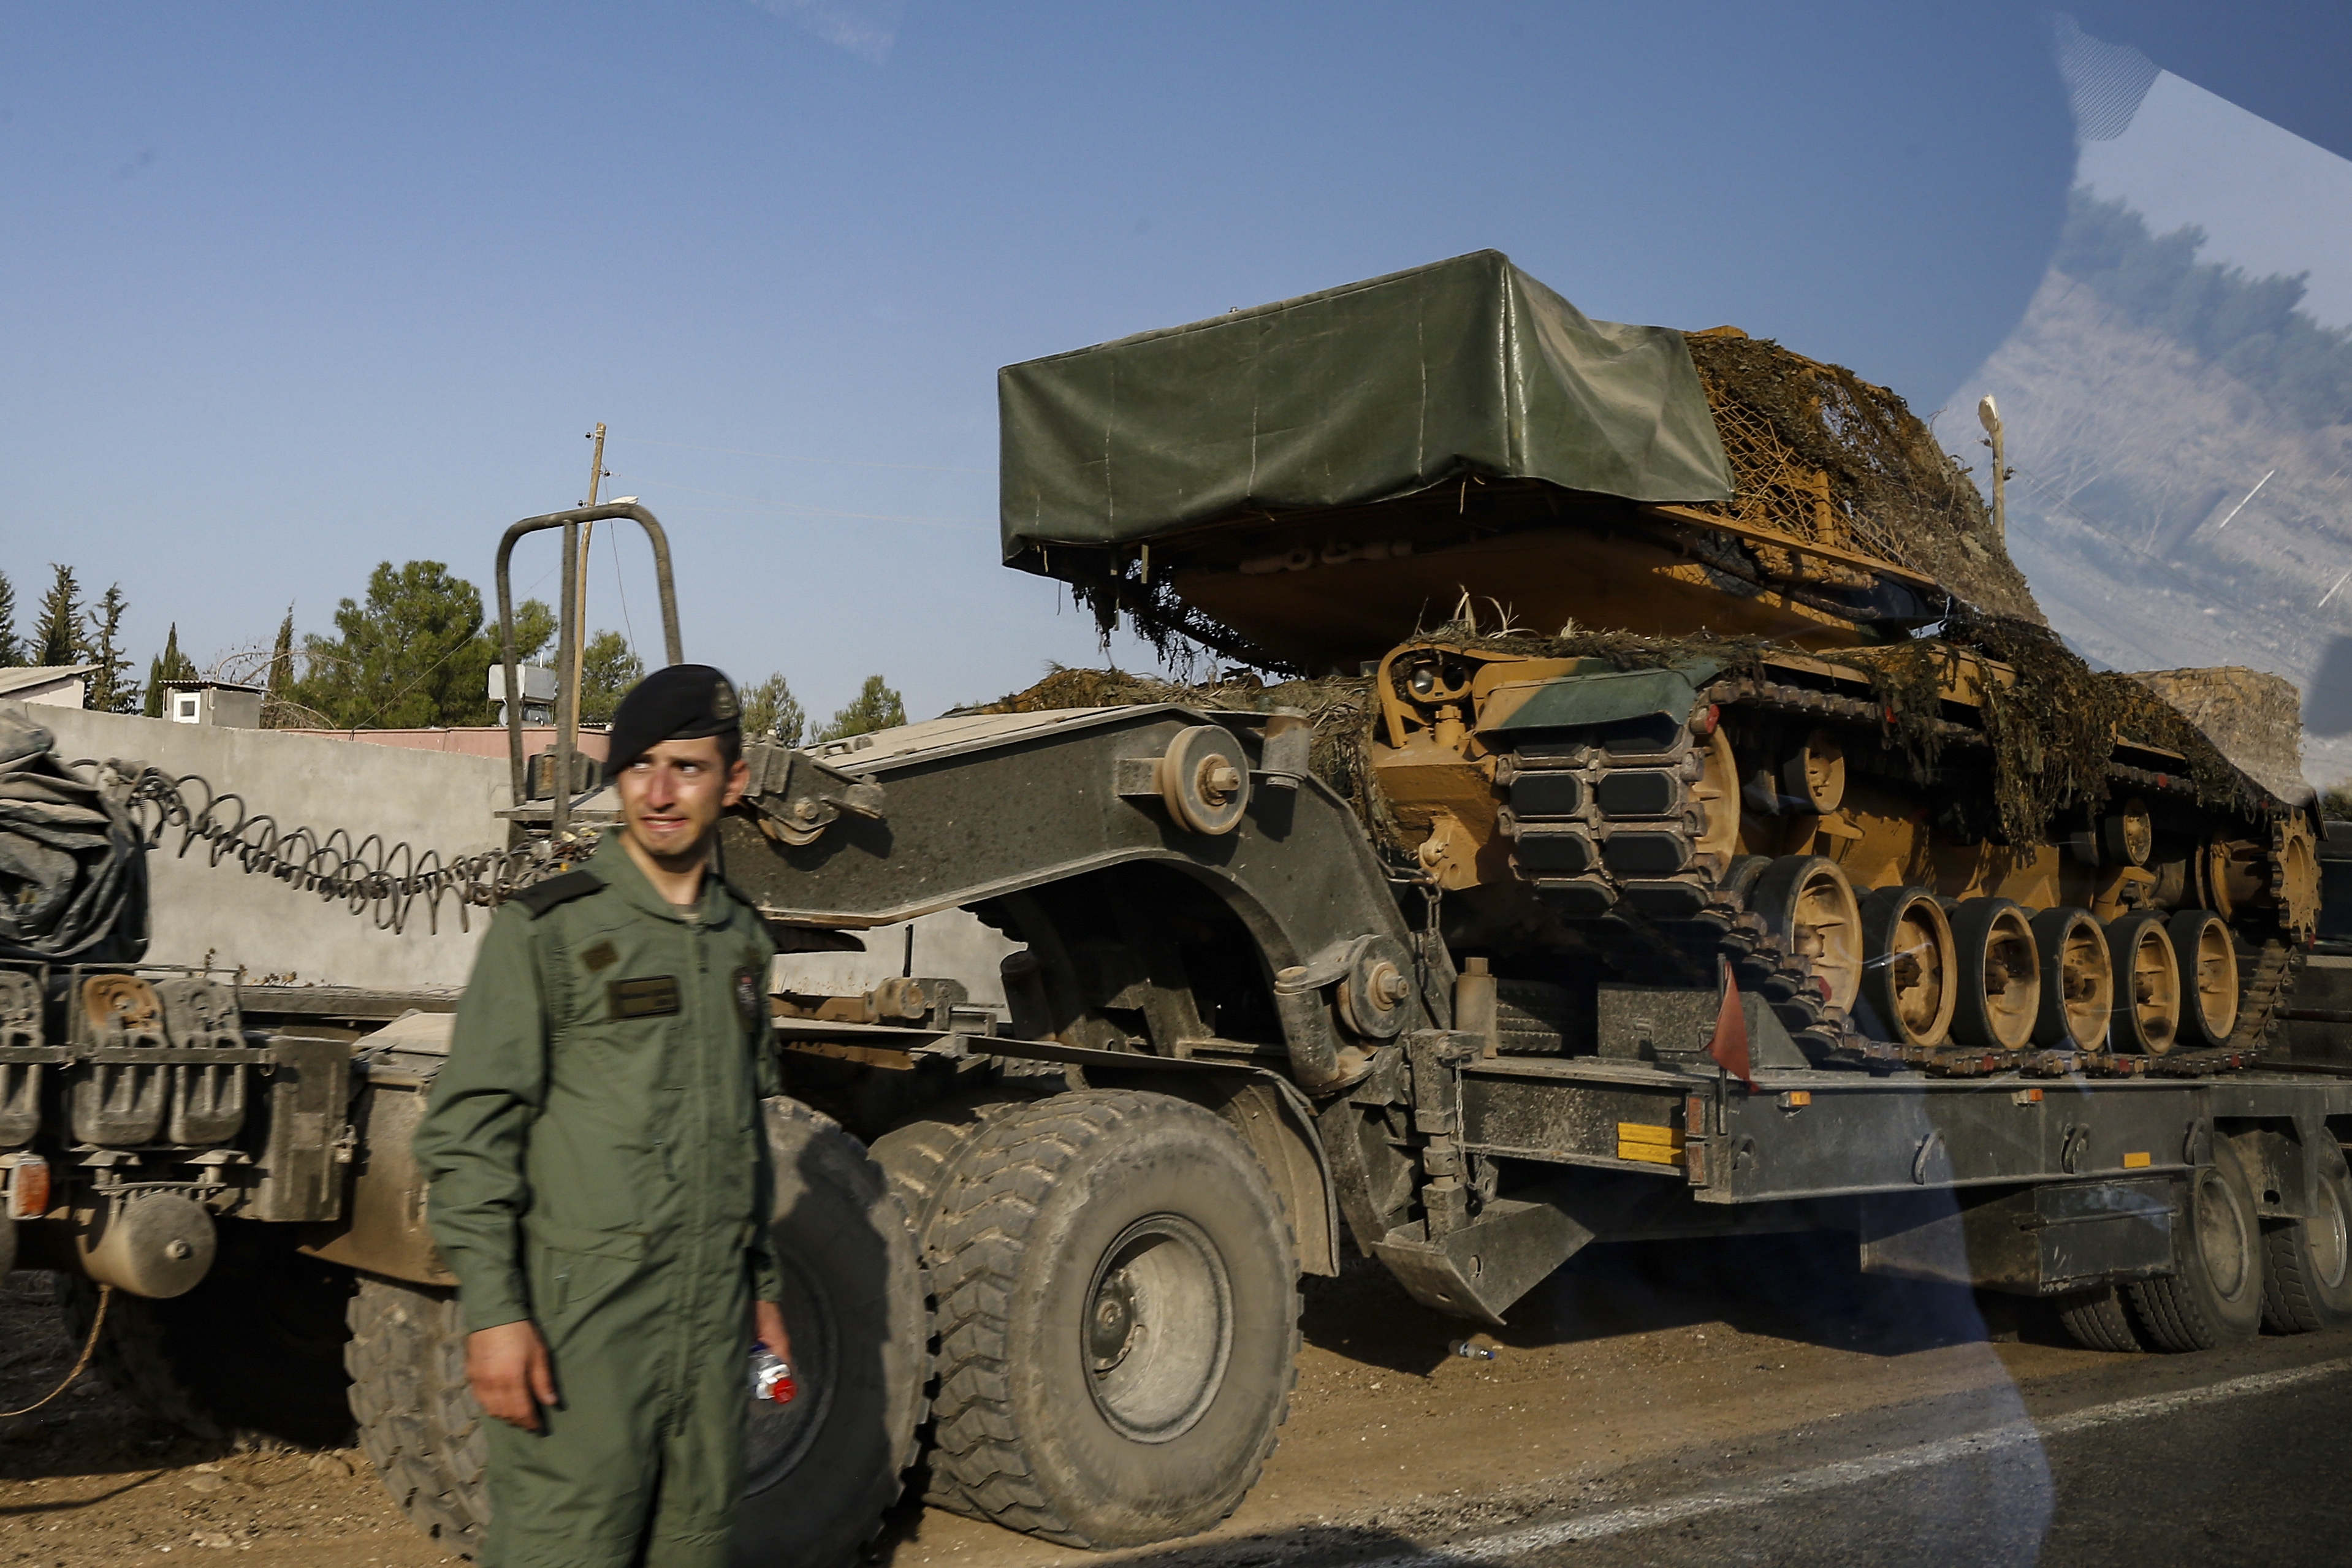 A Turkish forces soldiers looks on as tanks are transported by trucks to their new positions on a road towards the border with Syria in Sanliurfa province, Turkey, on Monday, Oct. 14, 2019. Syrian troops entered several northern towns and villages Monday, getting close to the Turkish border as Turkey's army and opposition forces backed by Ankara marched south in the same direction, raising concerns of a clash between the two sides as Turkey's invasion of northern Syria entered its sixth day. (AP Photo/Emrah Gurel)